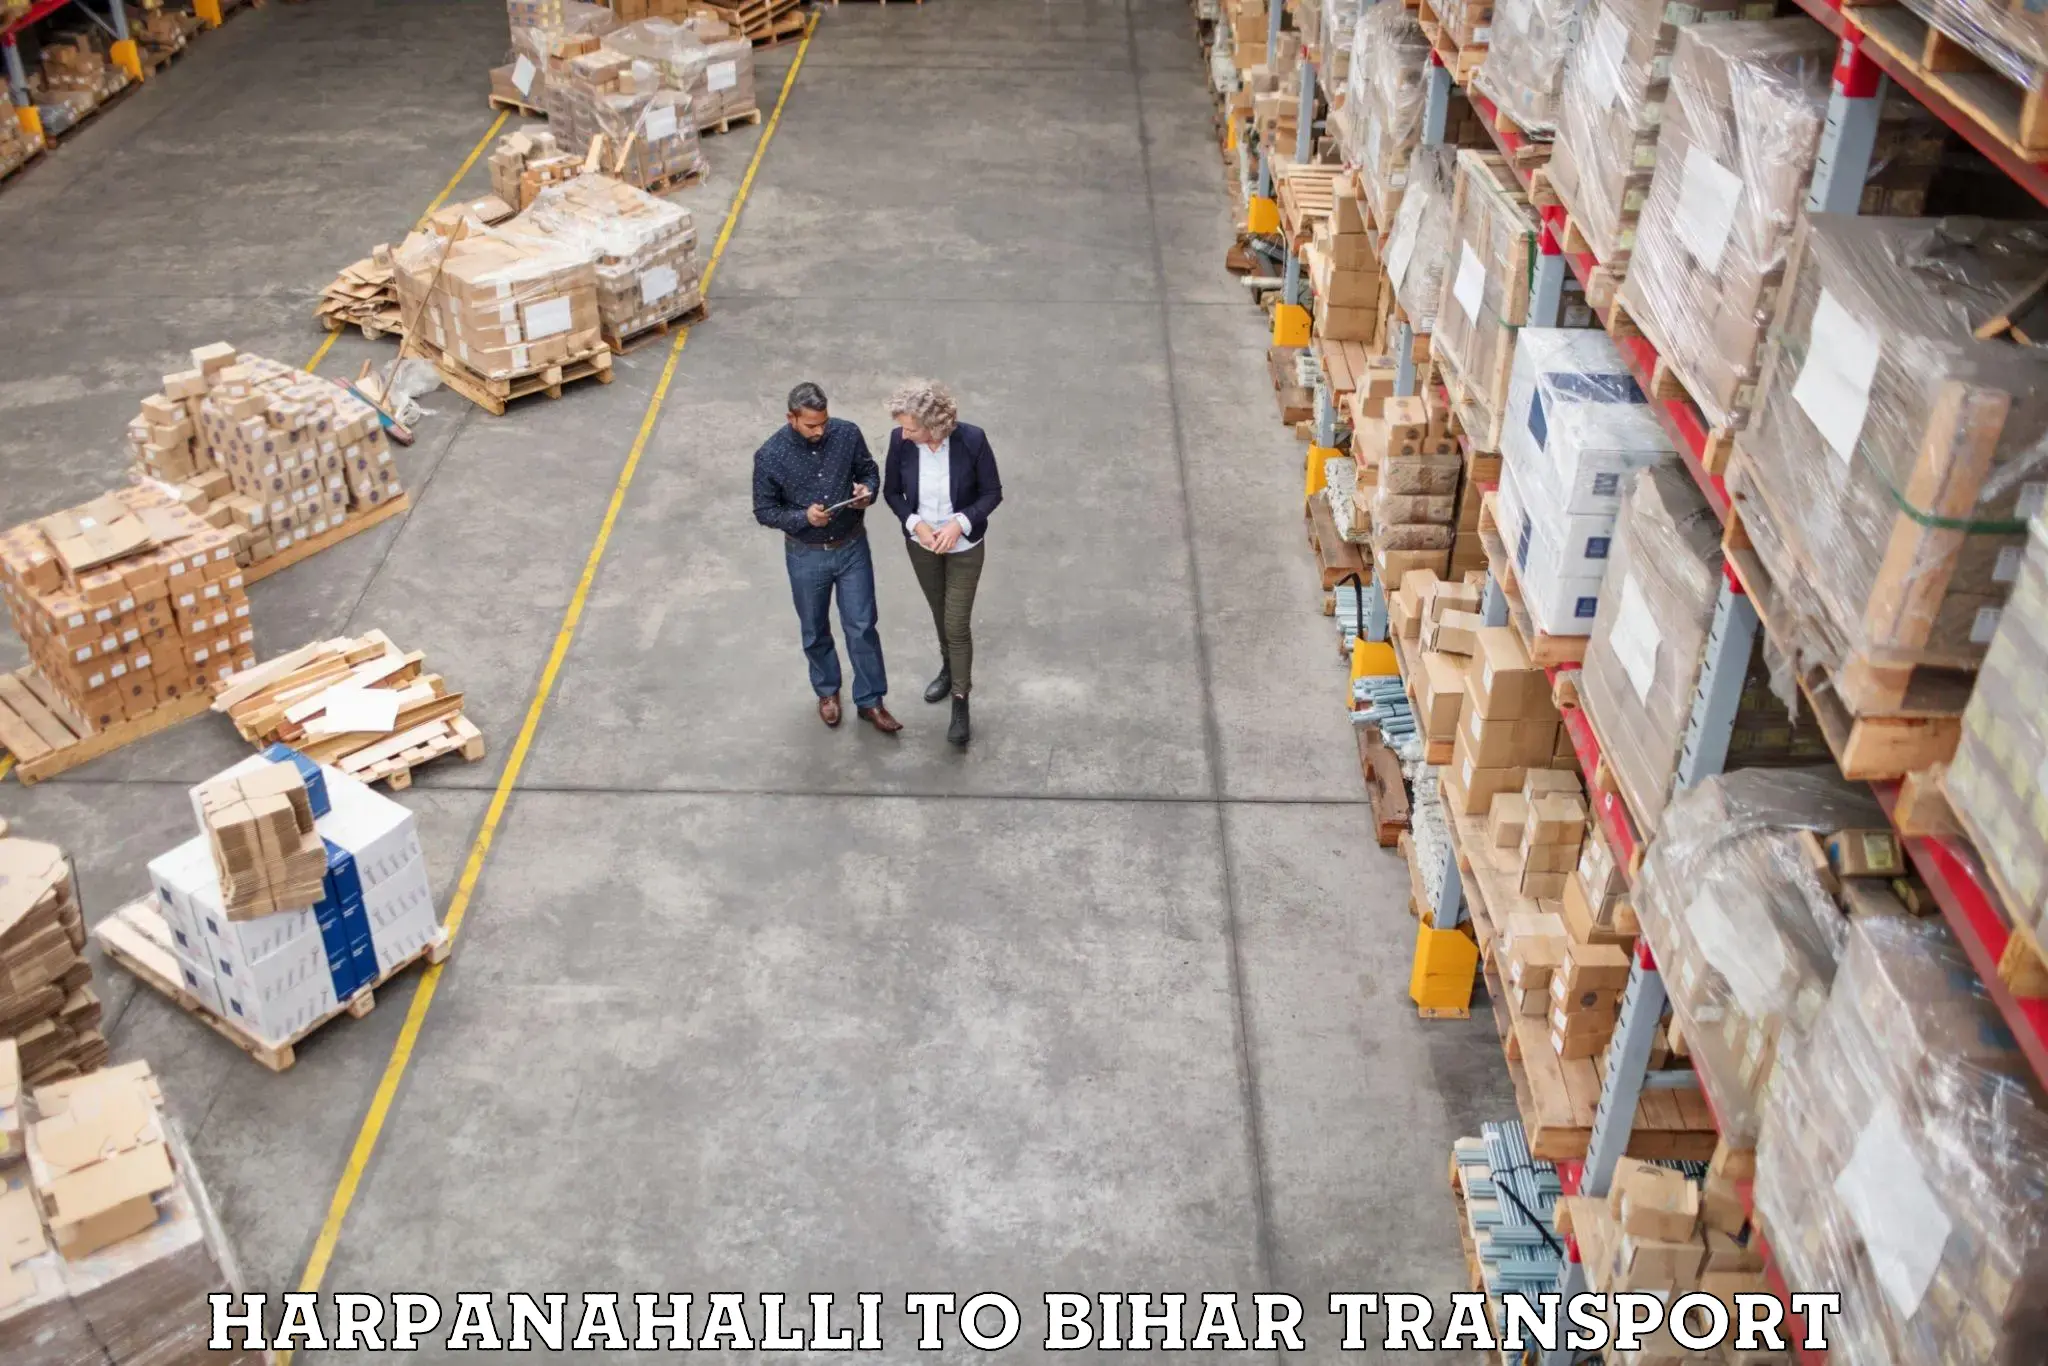 Container transport service Harpanahalli to Bhojpur